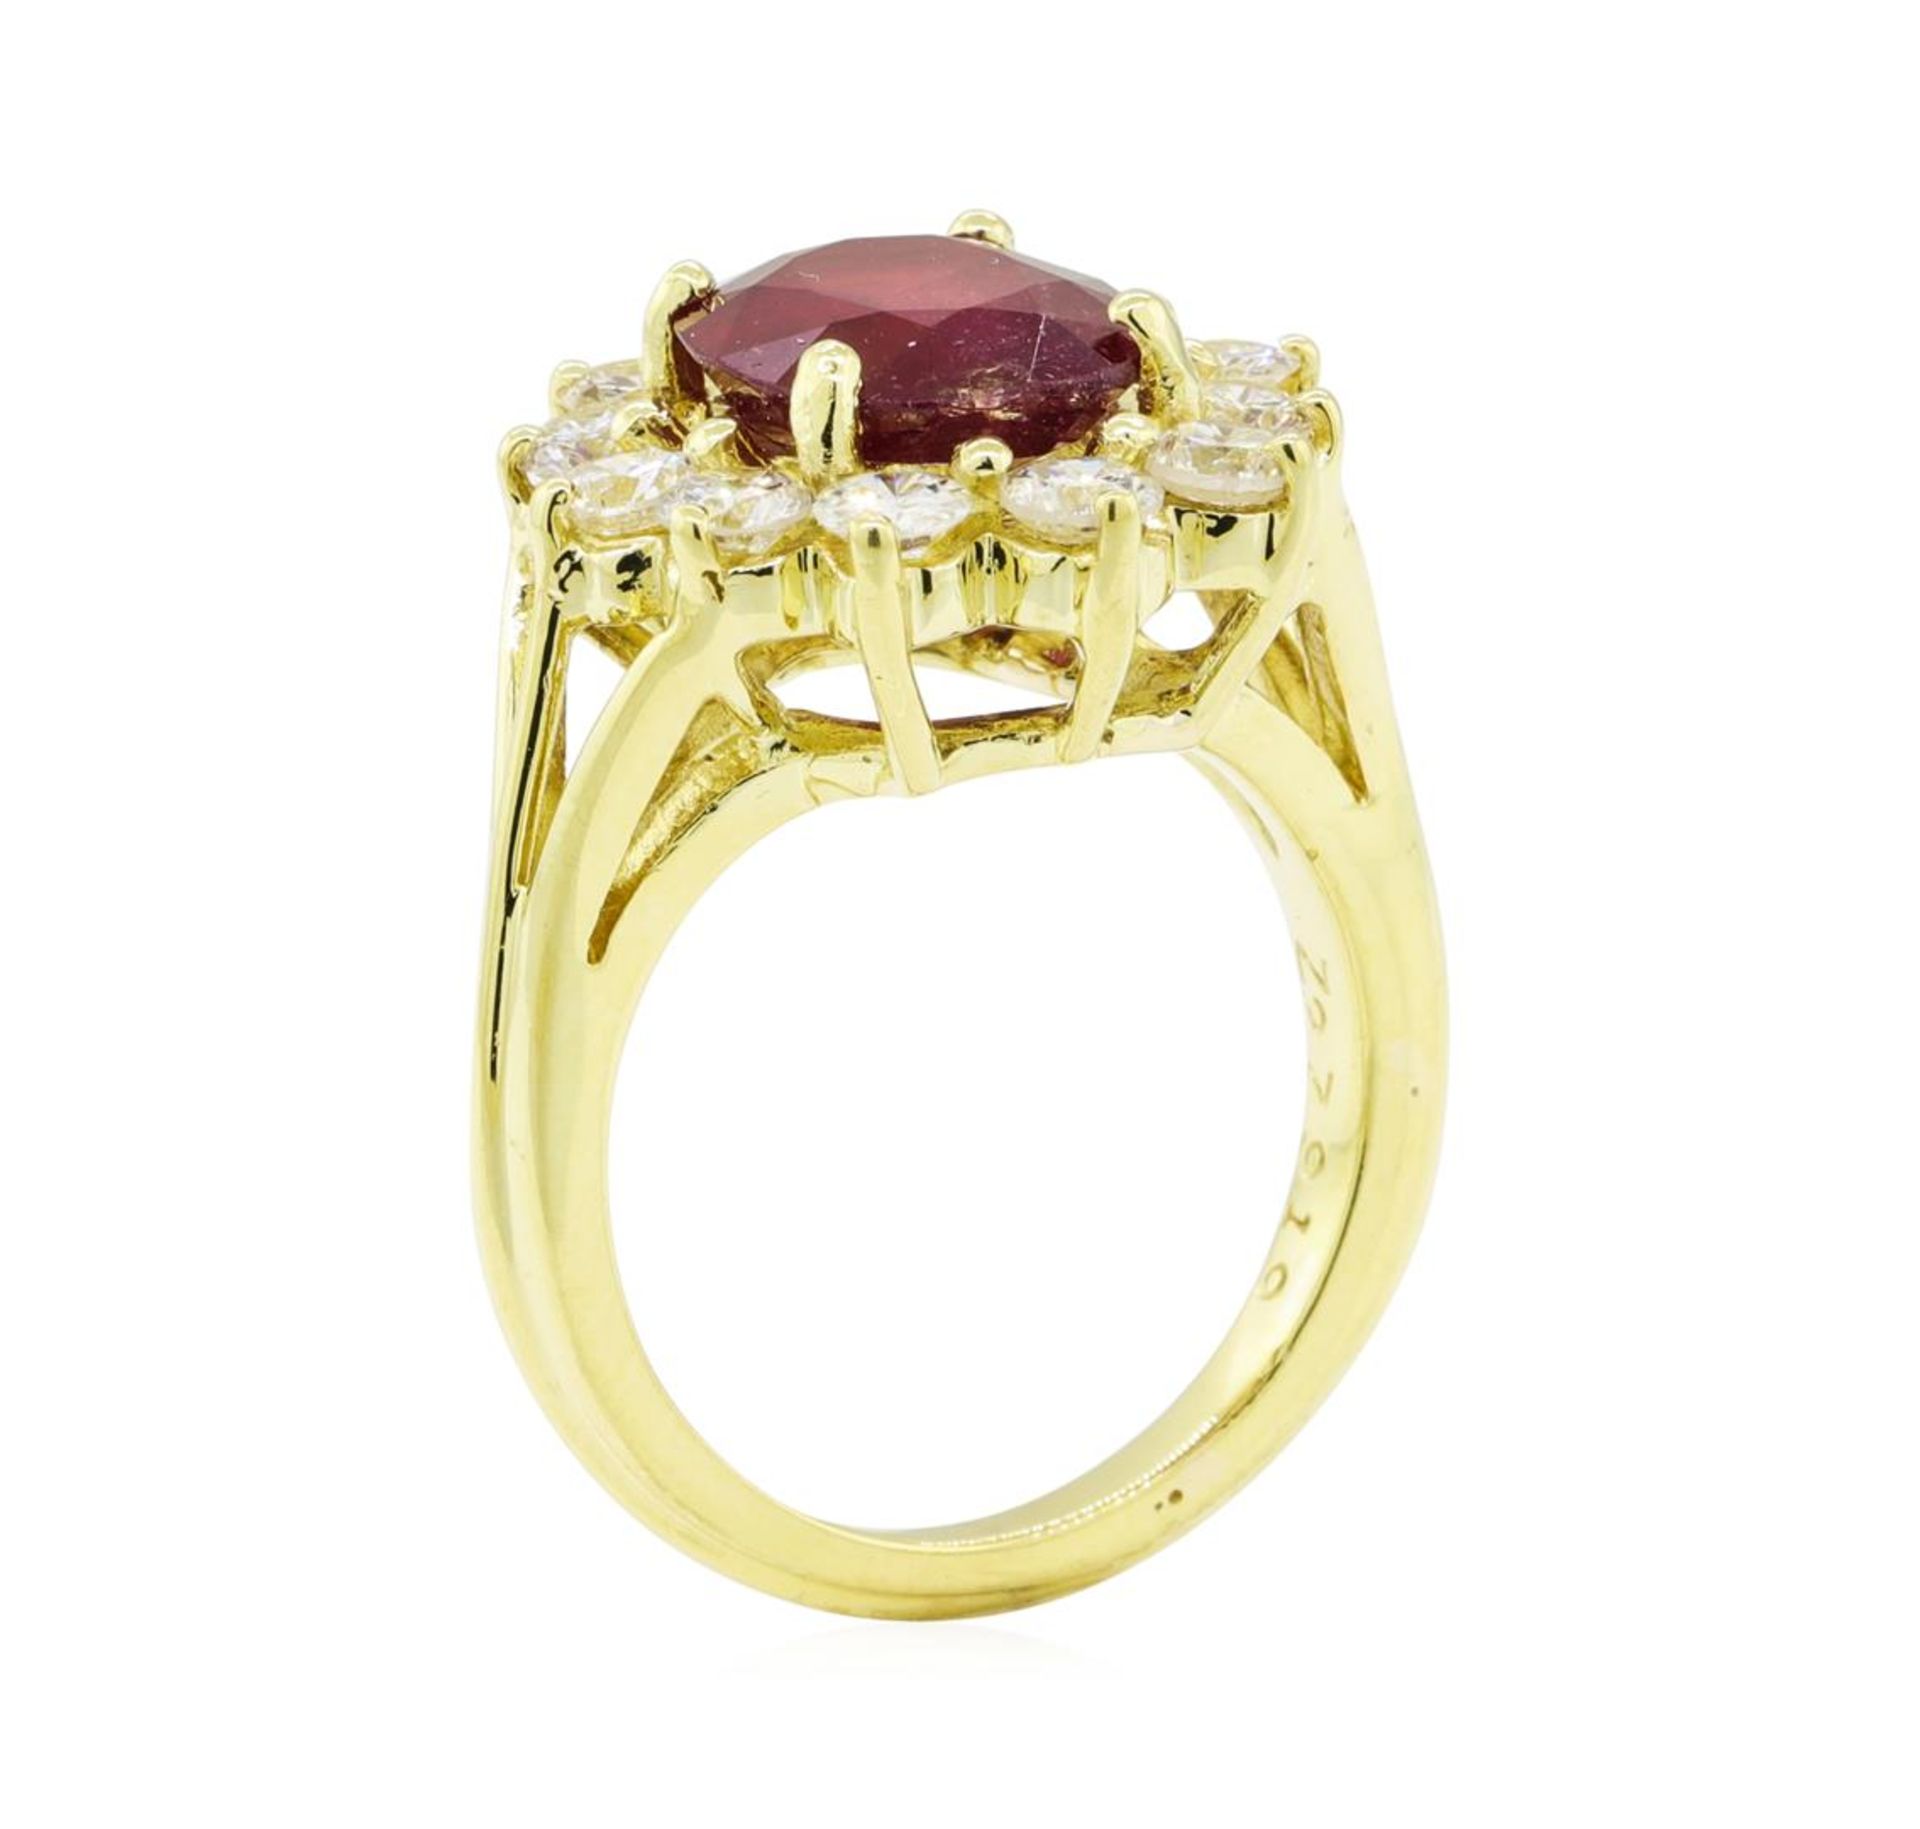 5.51 ctw Ruby and Diamond Ring - 18KT Yellow Gold - Image 4 of 5